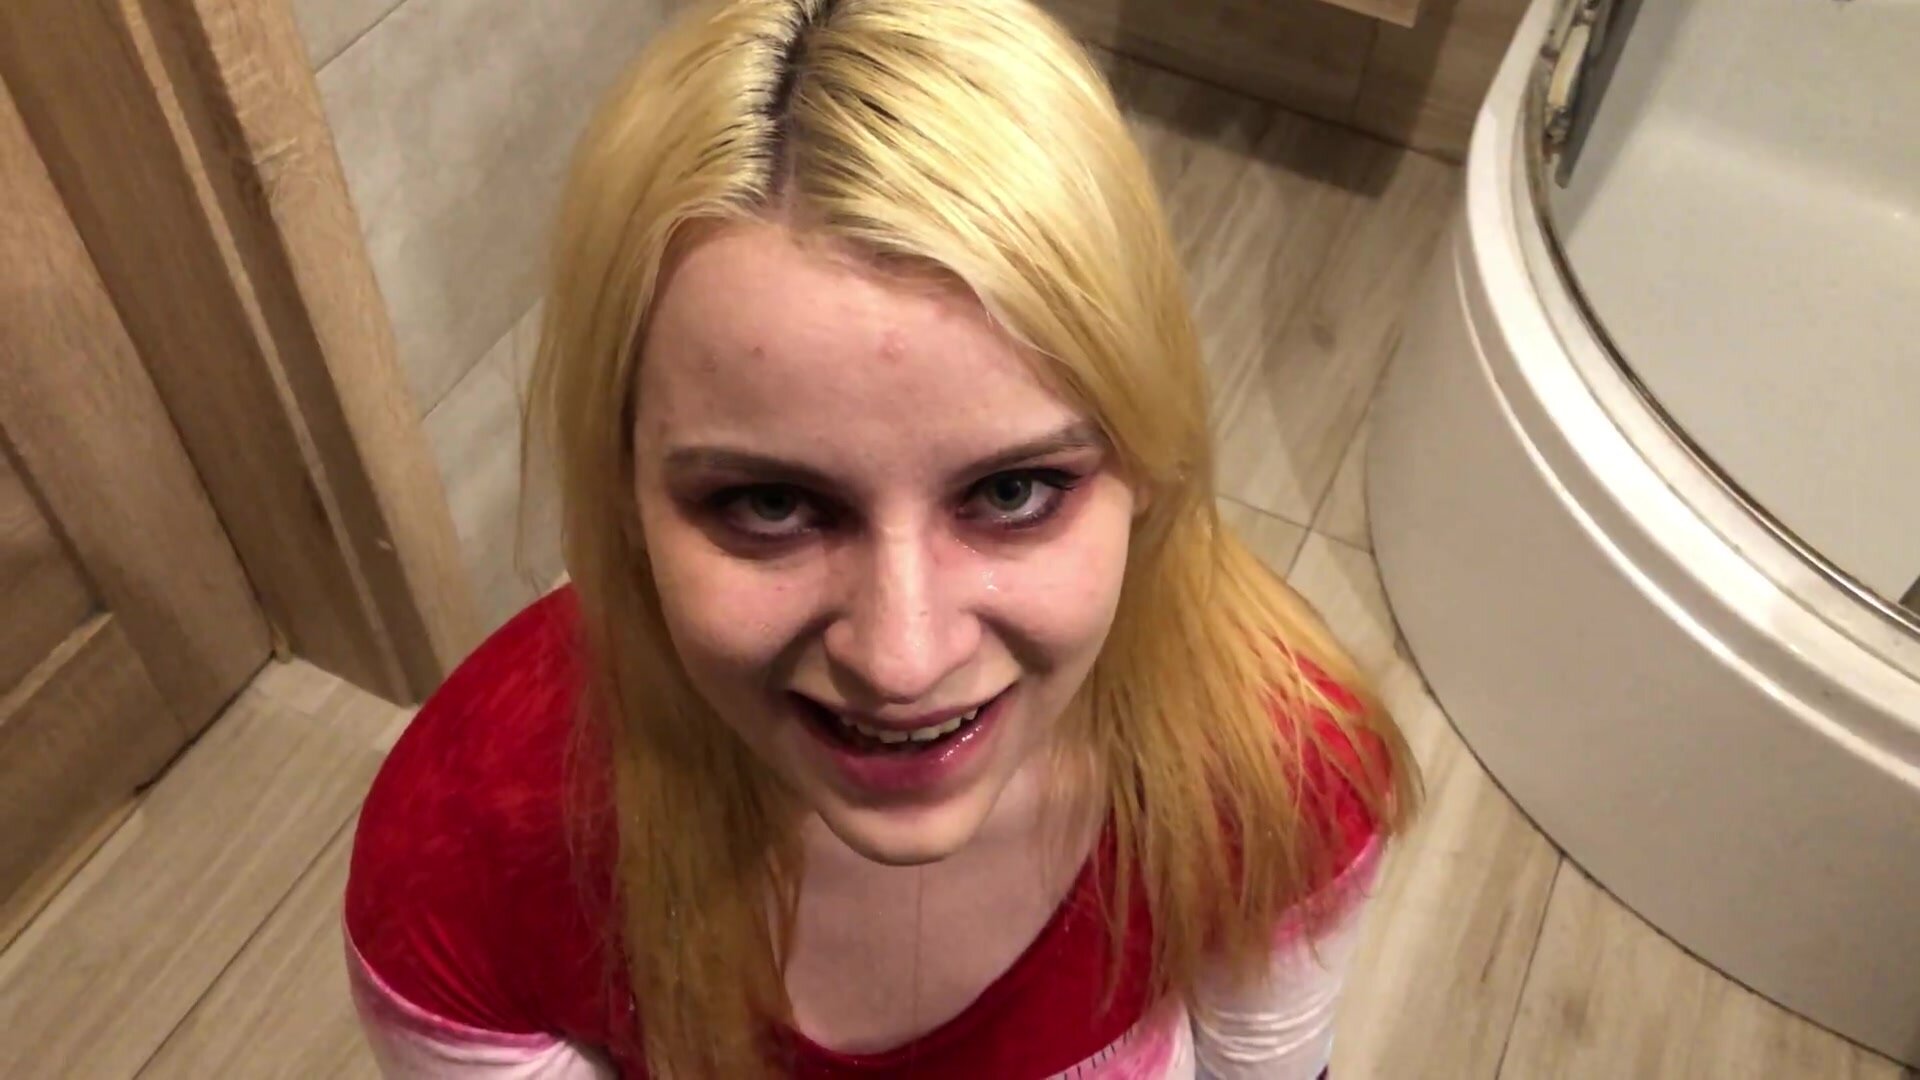 piss swallow - video 6